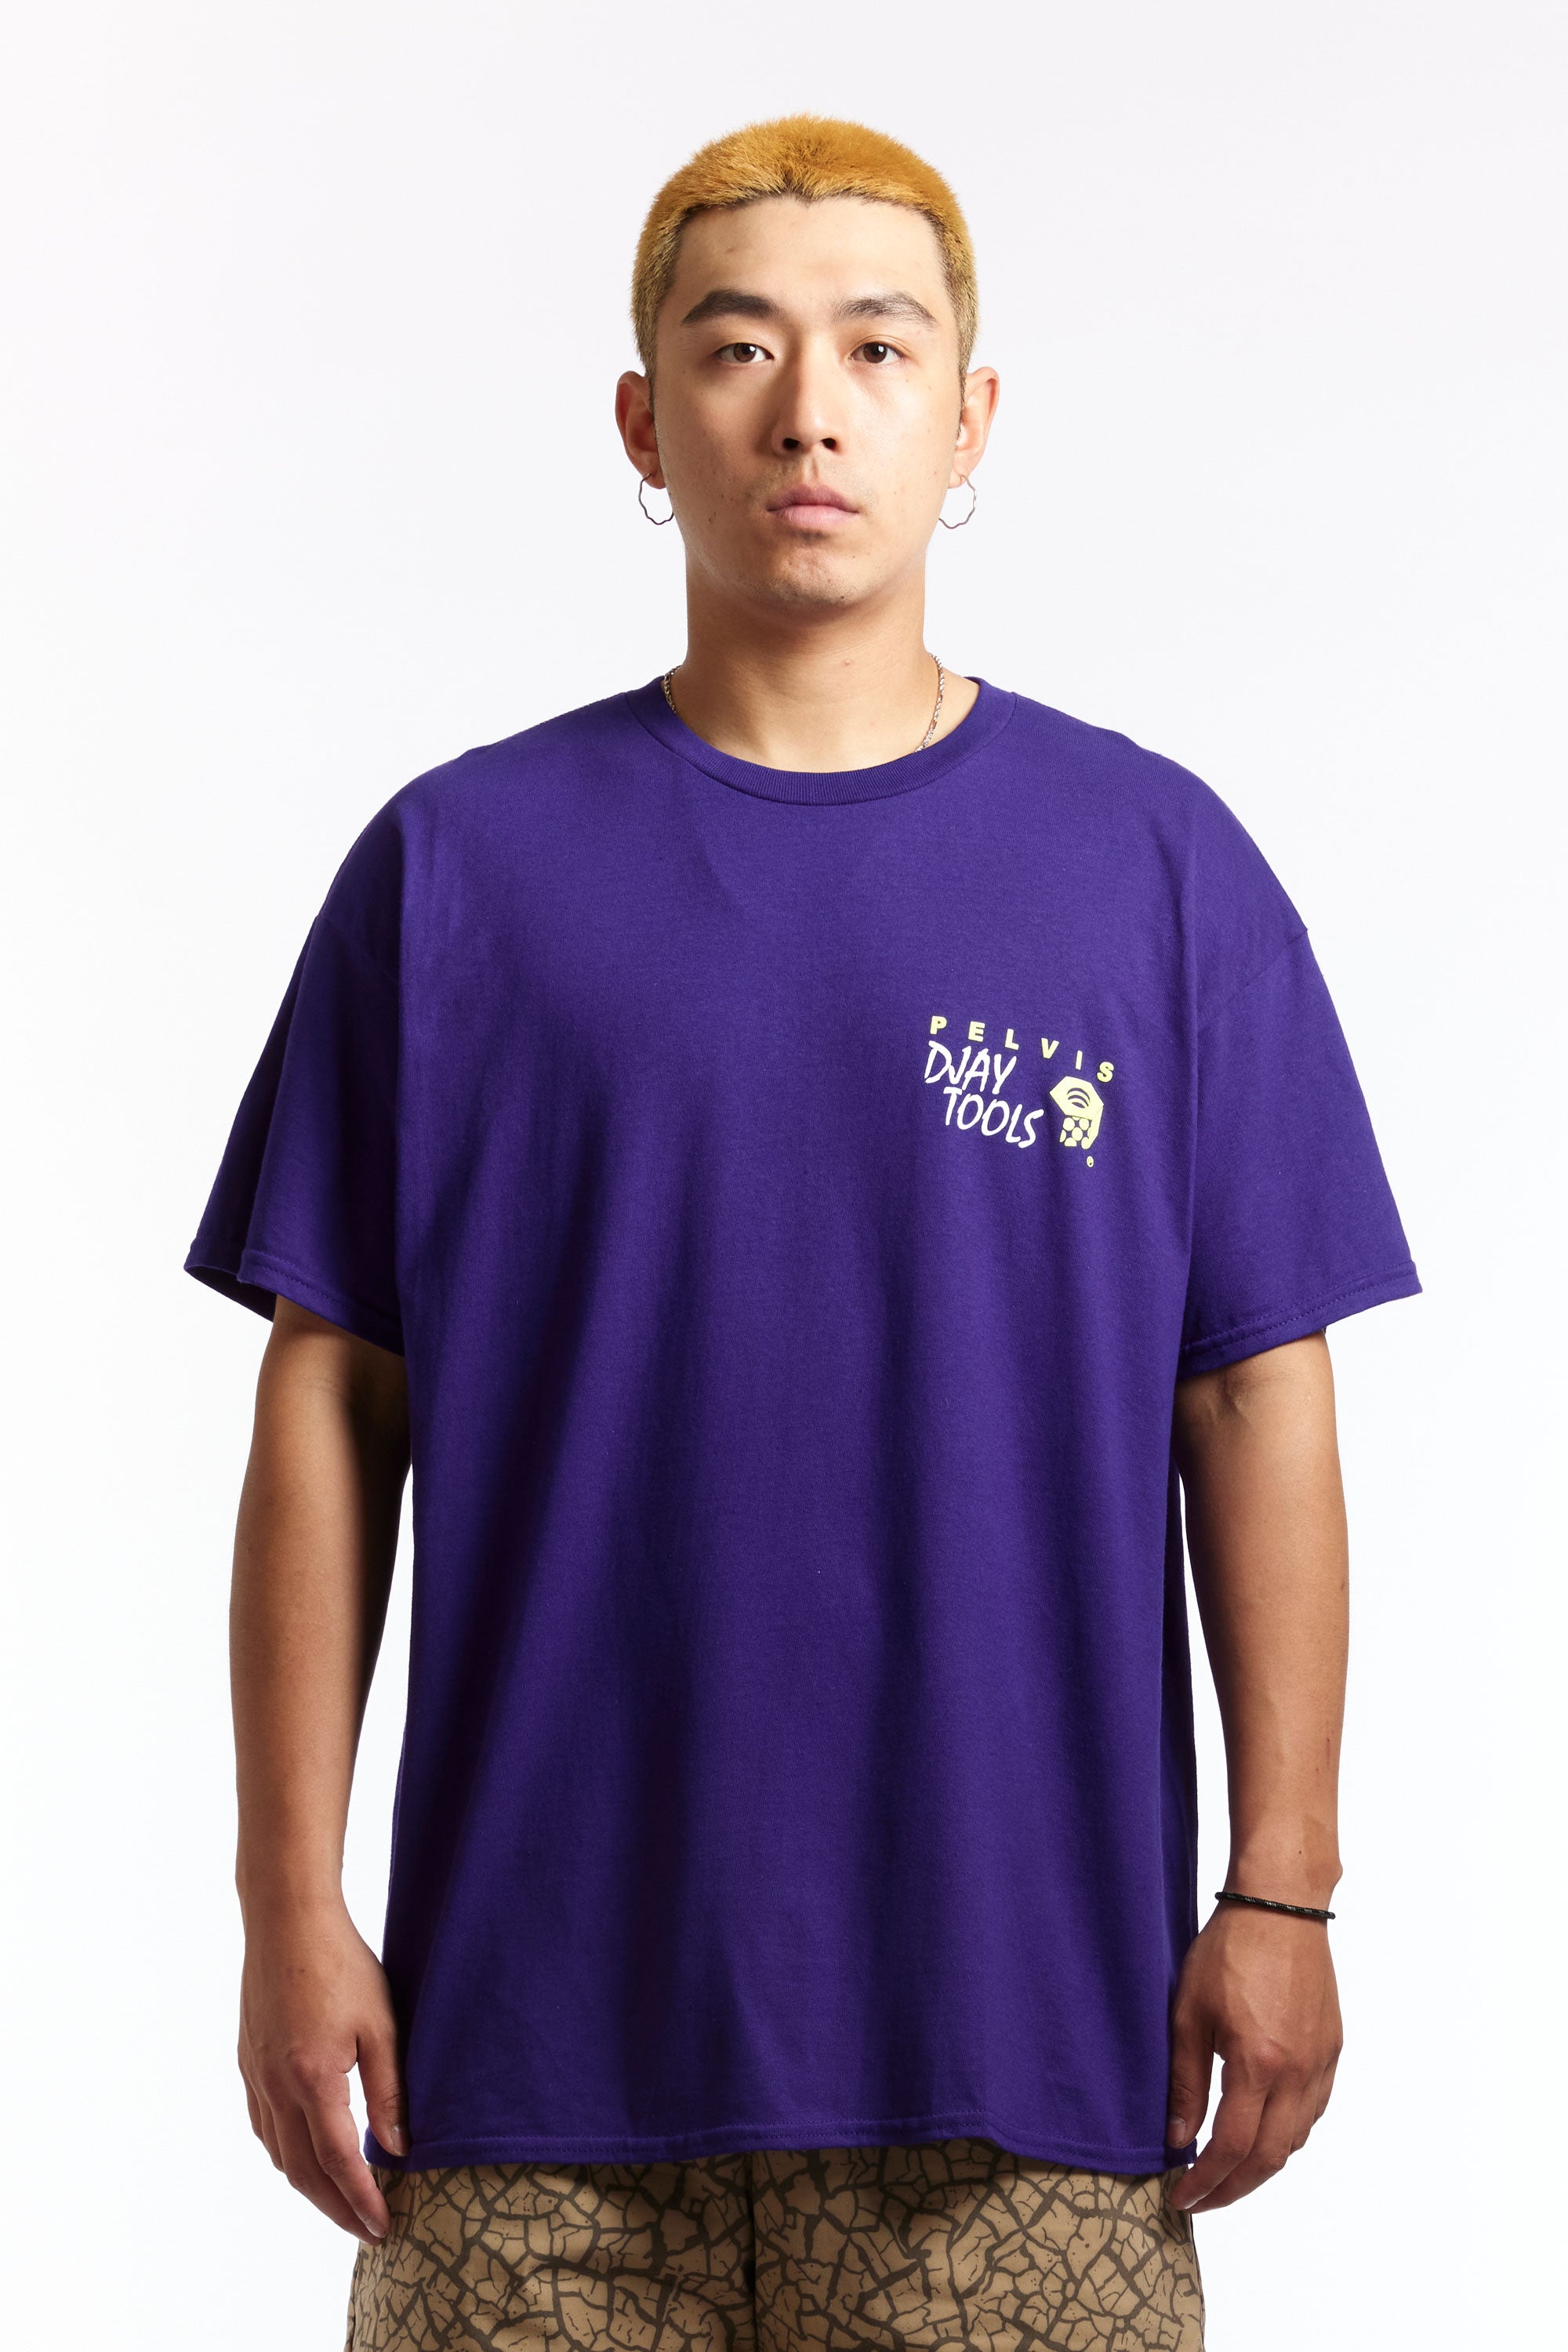 The PELVIS - DJAY TOOLS 3 TEE PURPLE available online with global shipping, and in PAM Stores Melbourne and Sydney.